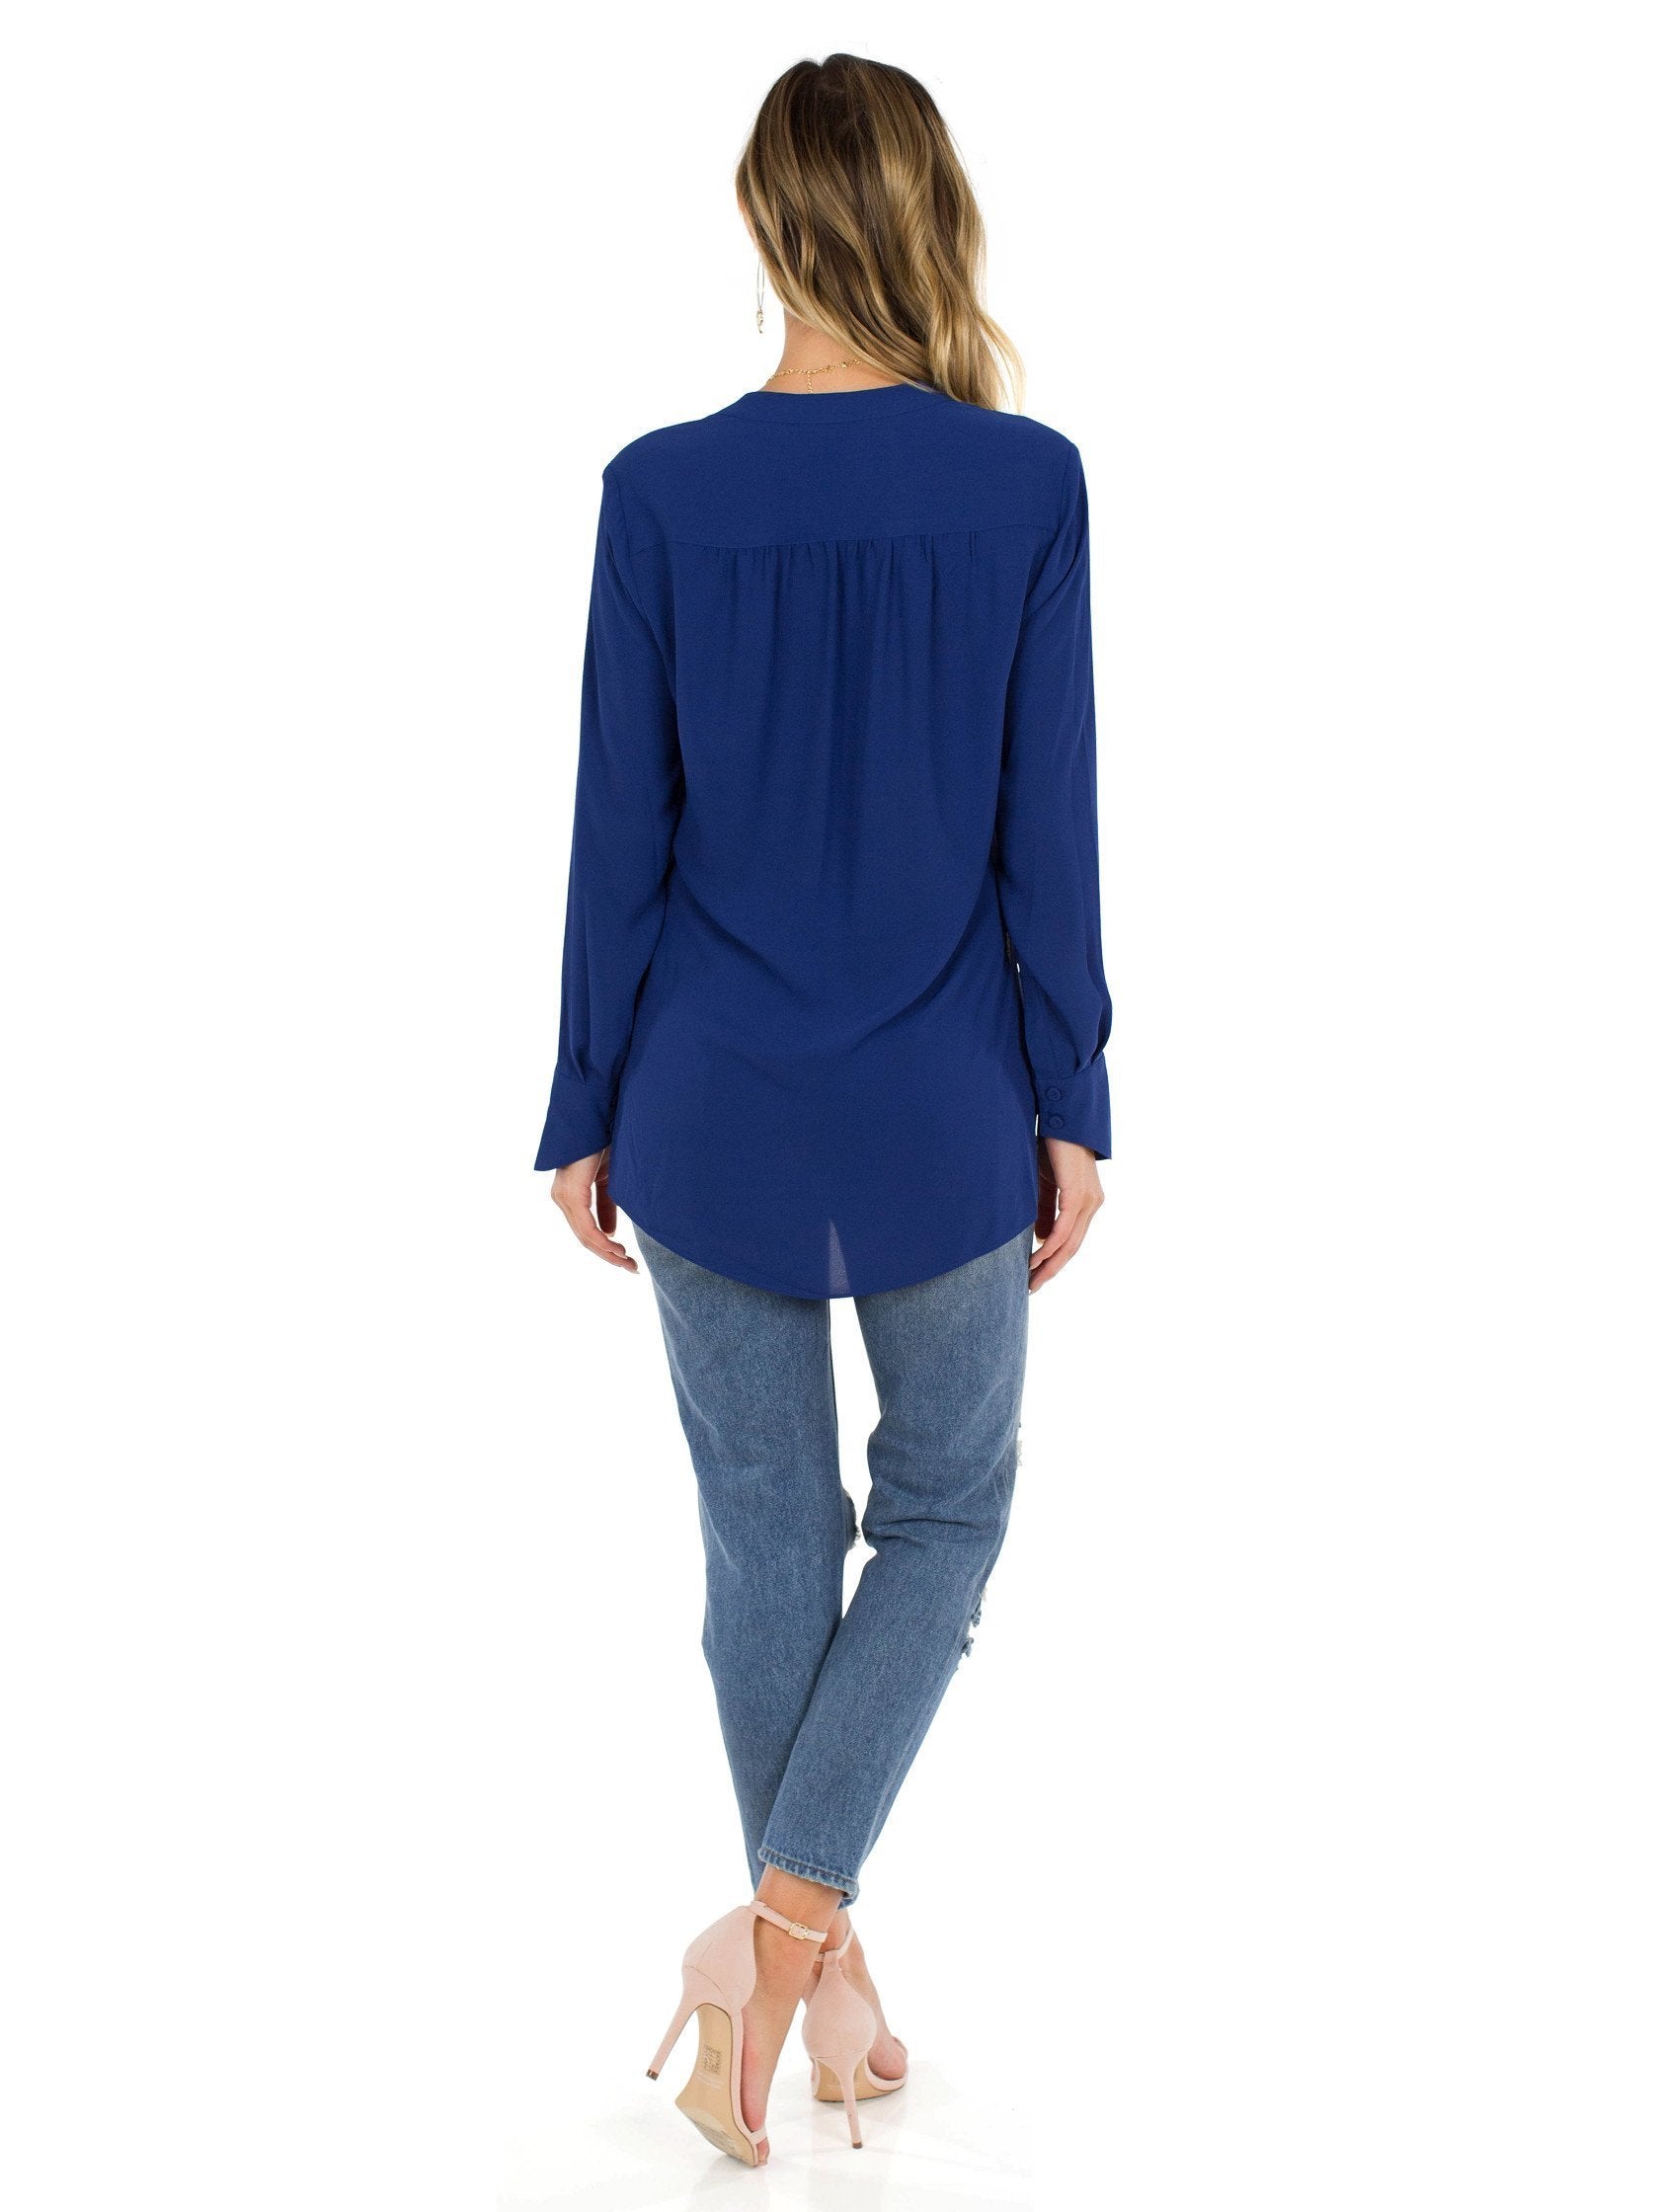 Women outfit in a top rental from BCBGMAXAZRIA called Jaklyn Draped-front Blouse